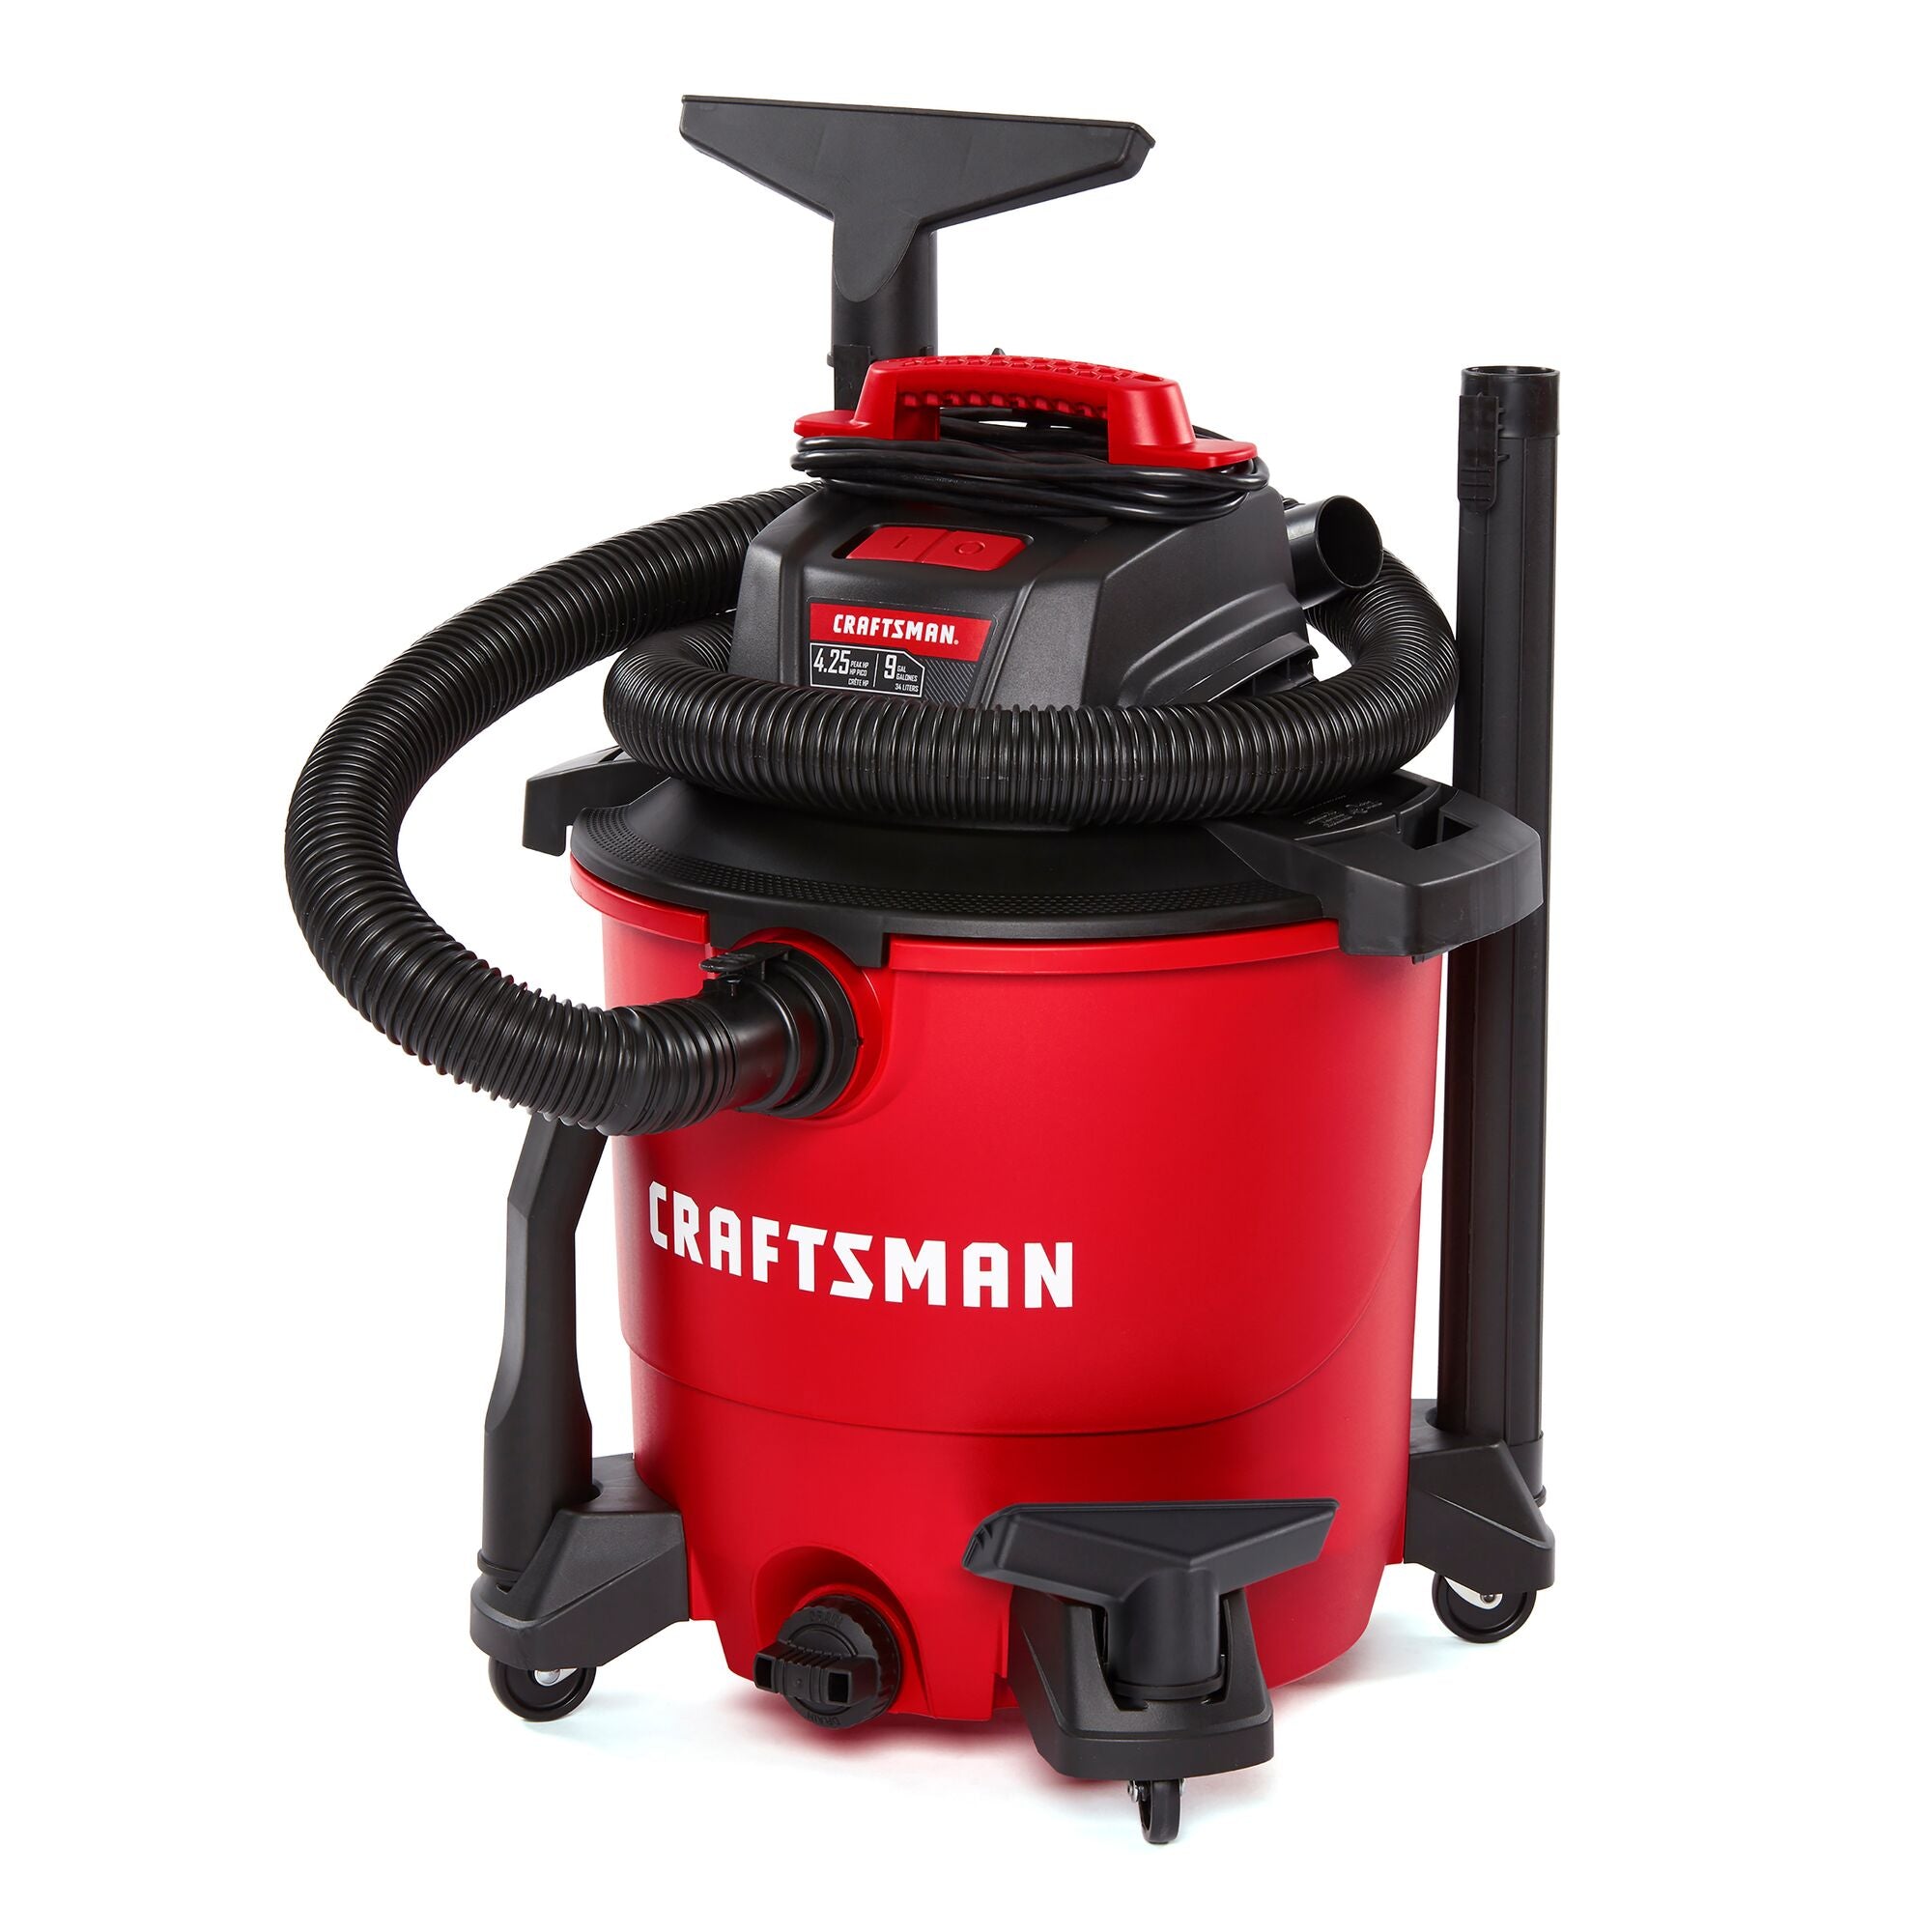 Left facing CRAFTSMAN Wet/Dry Vacuum with CRAFTSMAN 1-7/8 inch Wet Nozzle stored on board vacuum